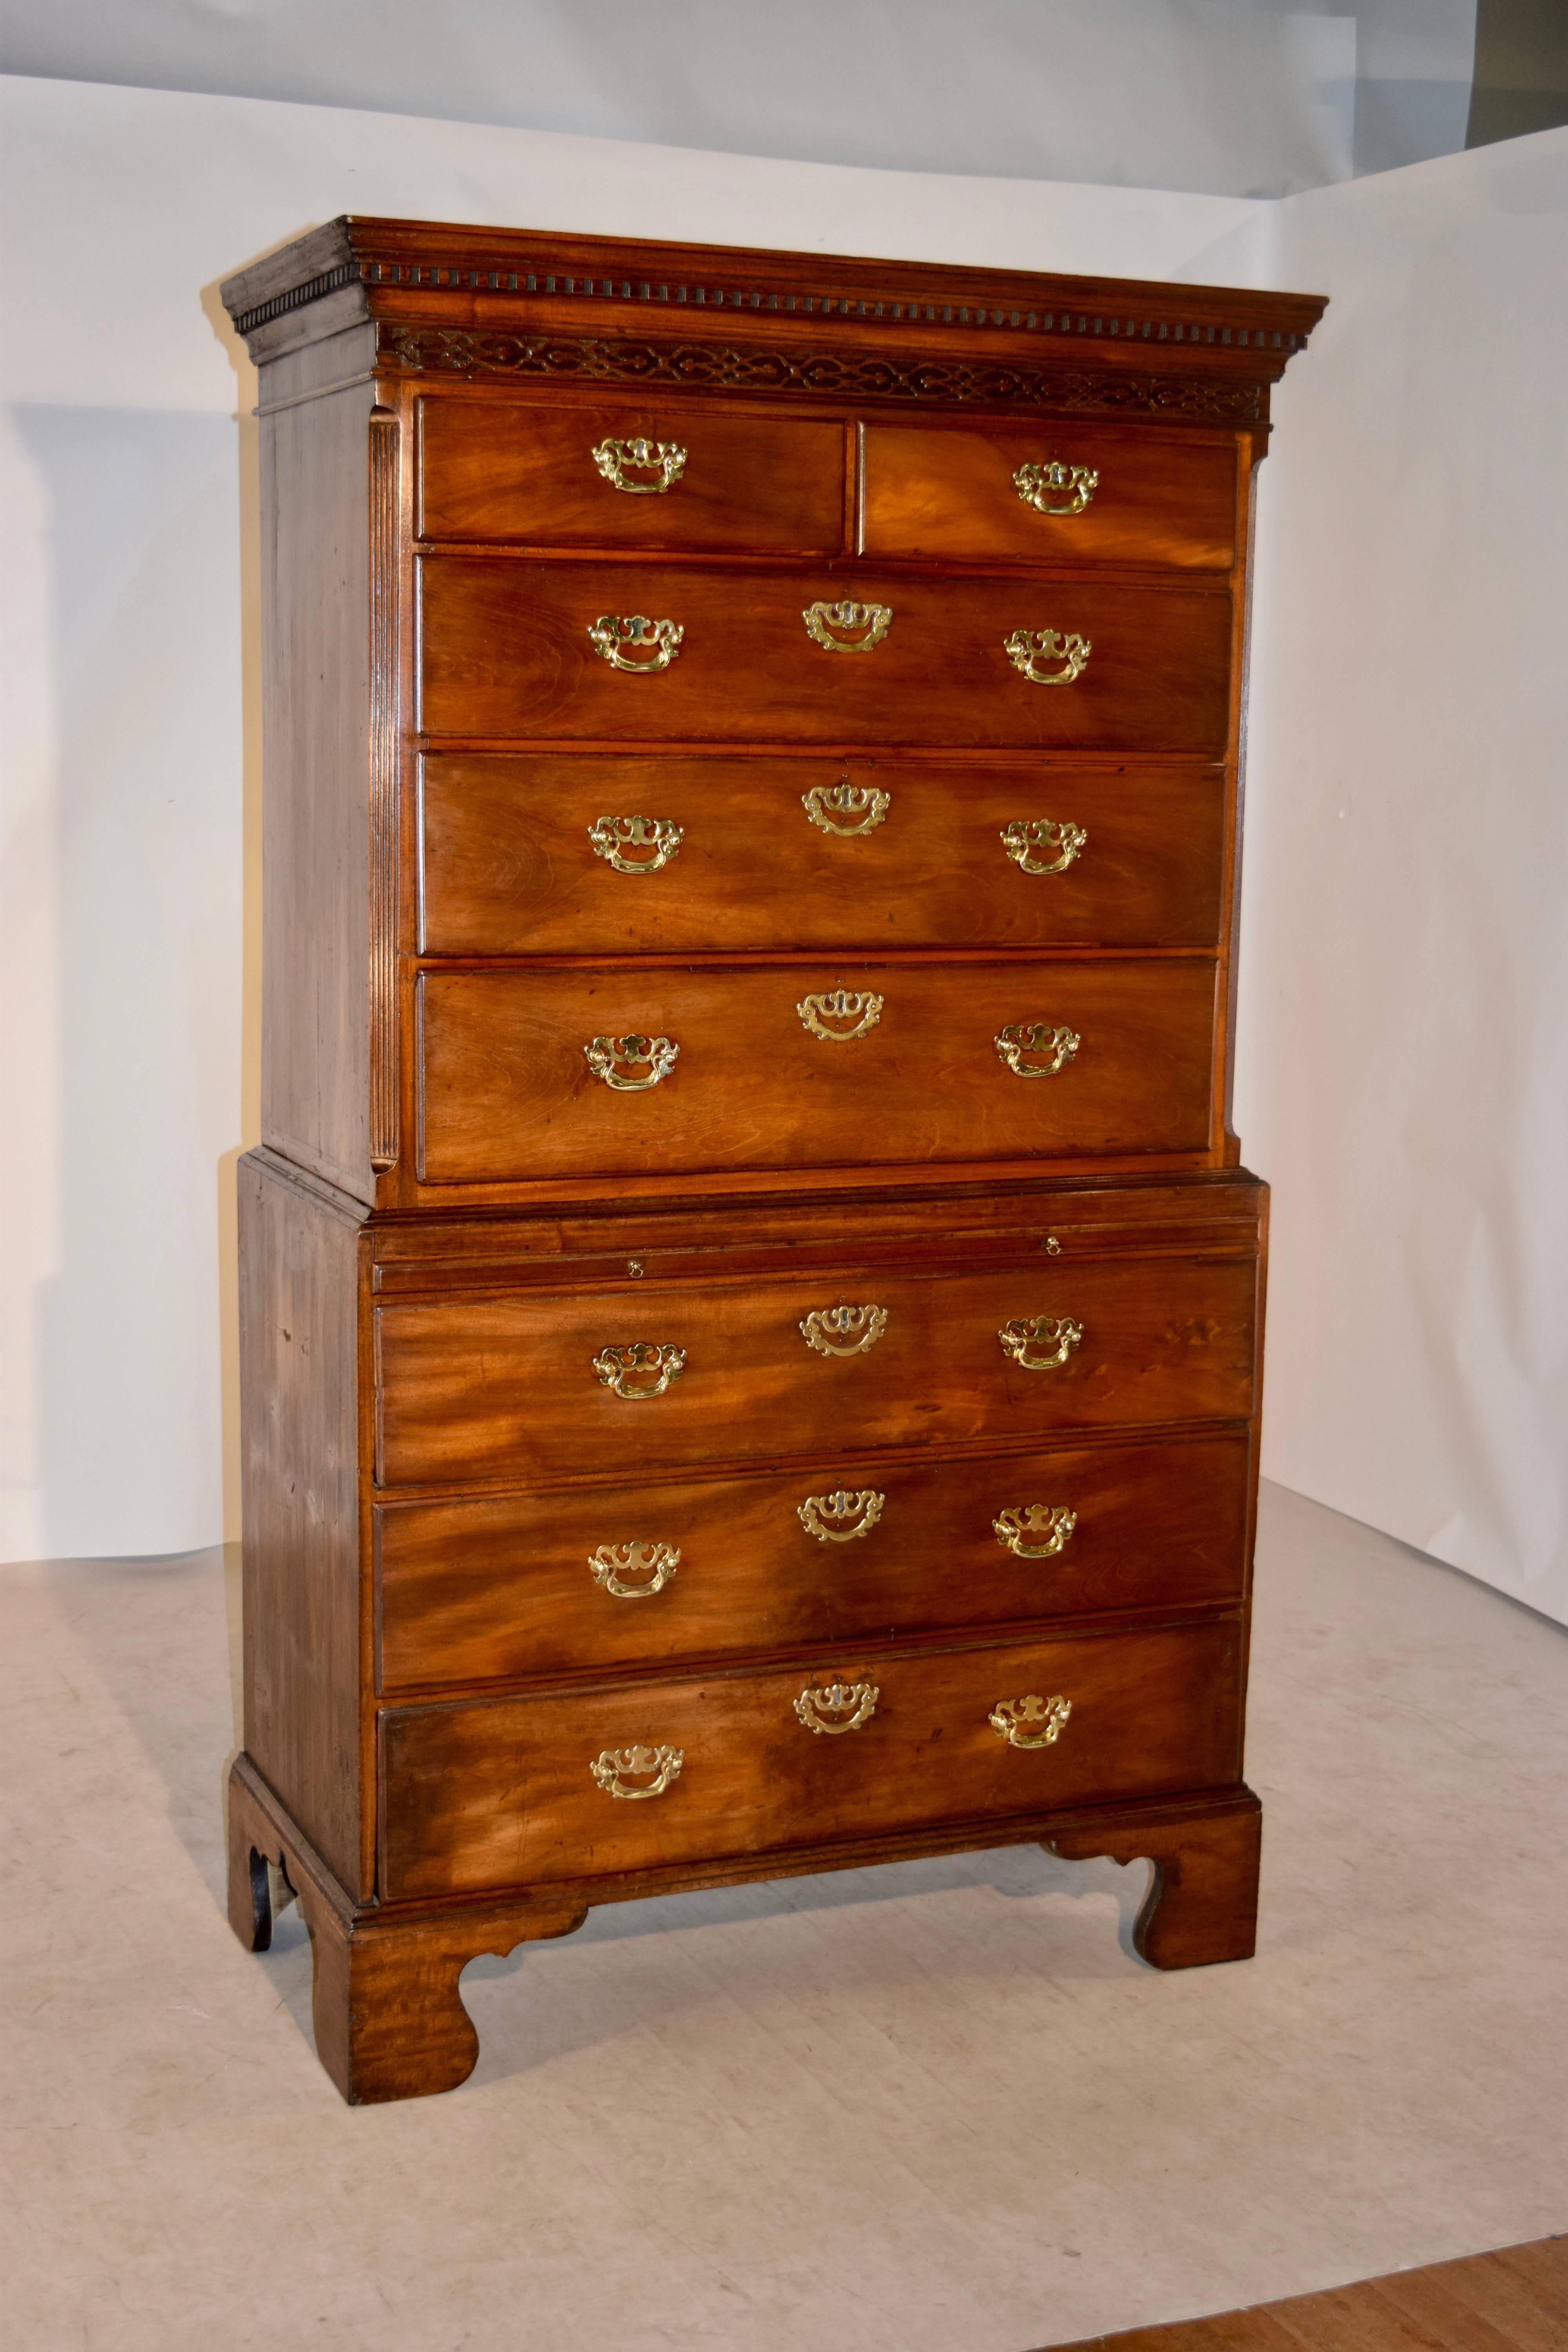 18th century chest on chest from England. There is a dental molding surrounding the top, following down to carved Chippendale fretwork decoration. The upper case has two over three drawers, and rests on the lower case, which has a pull-out candle